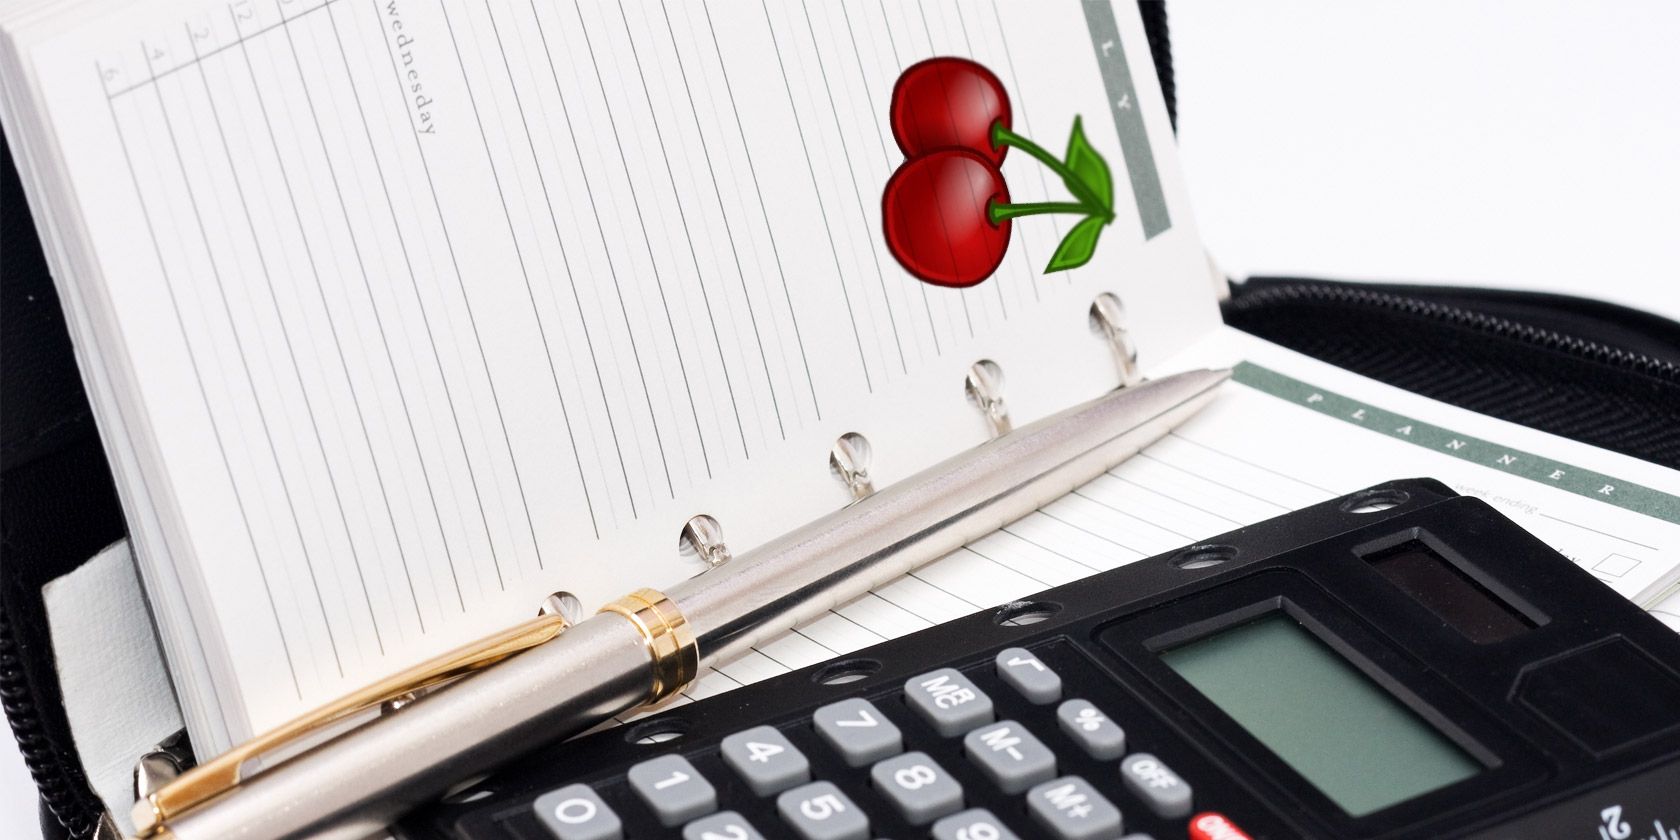 CherryTree 1.0.2.0 for mac download